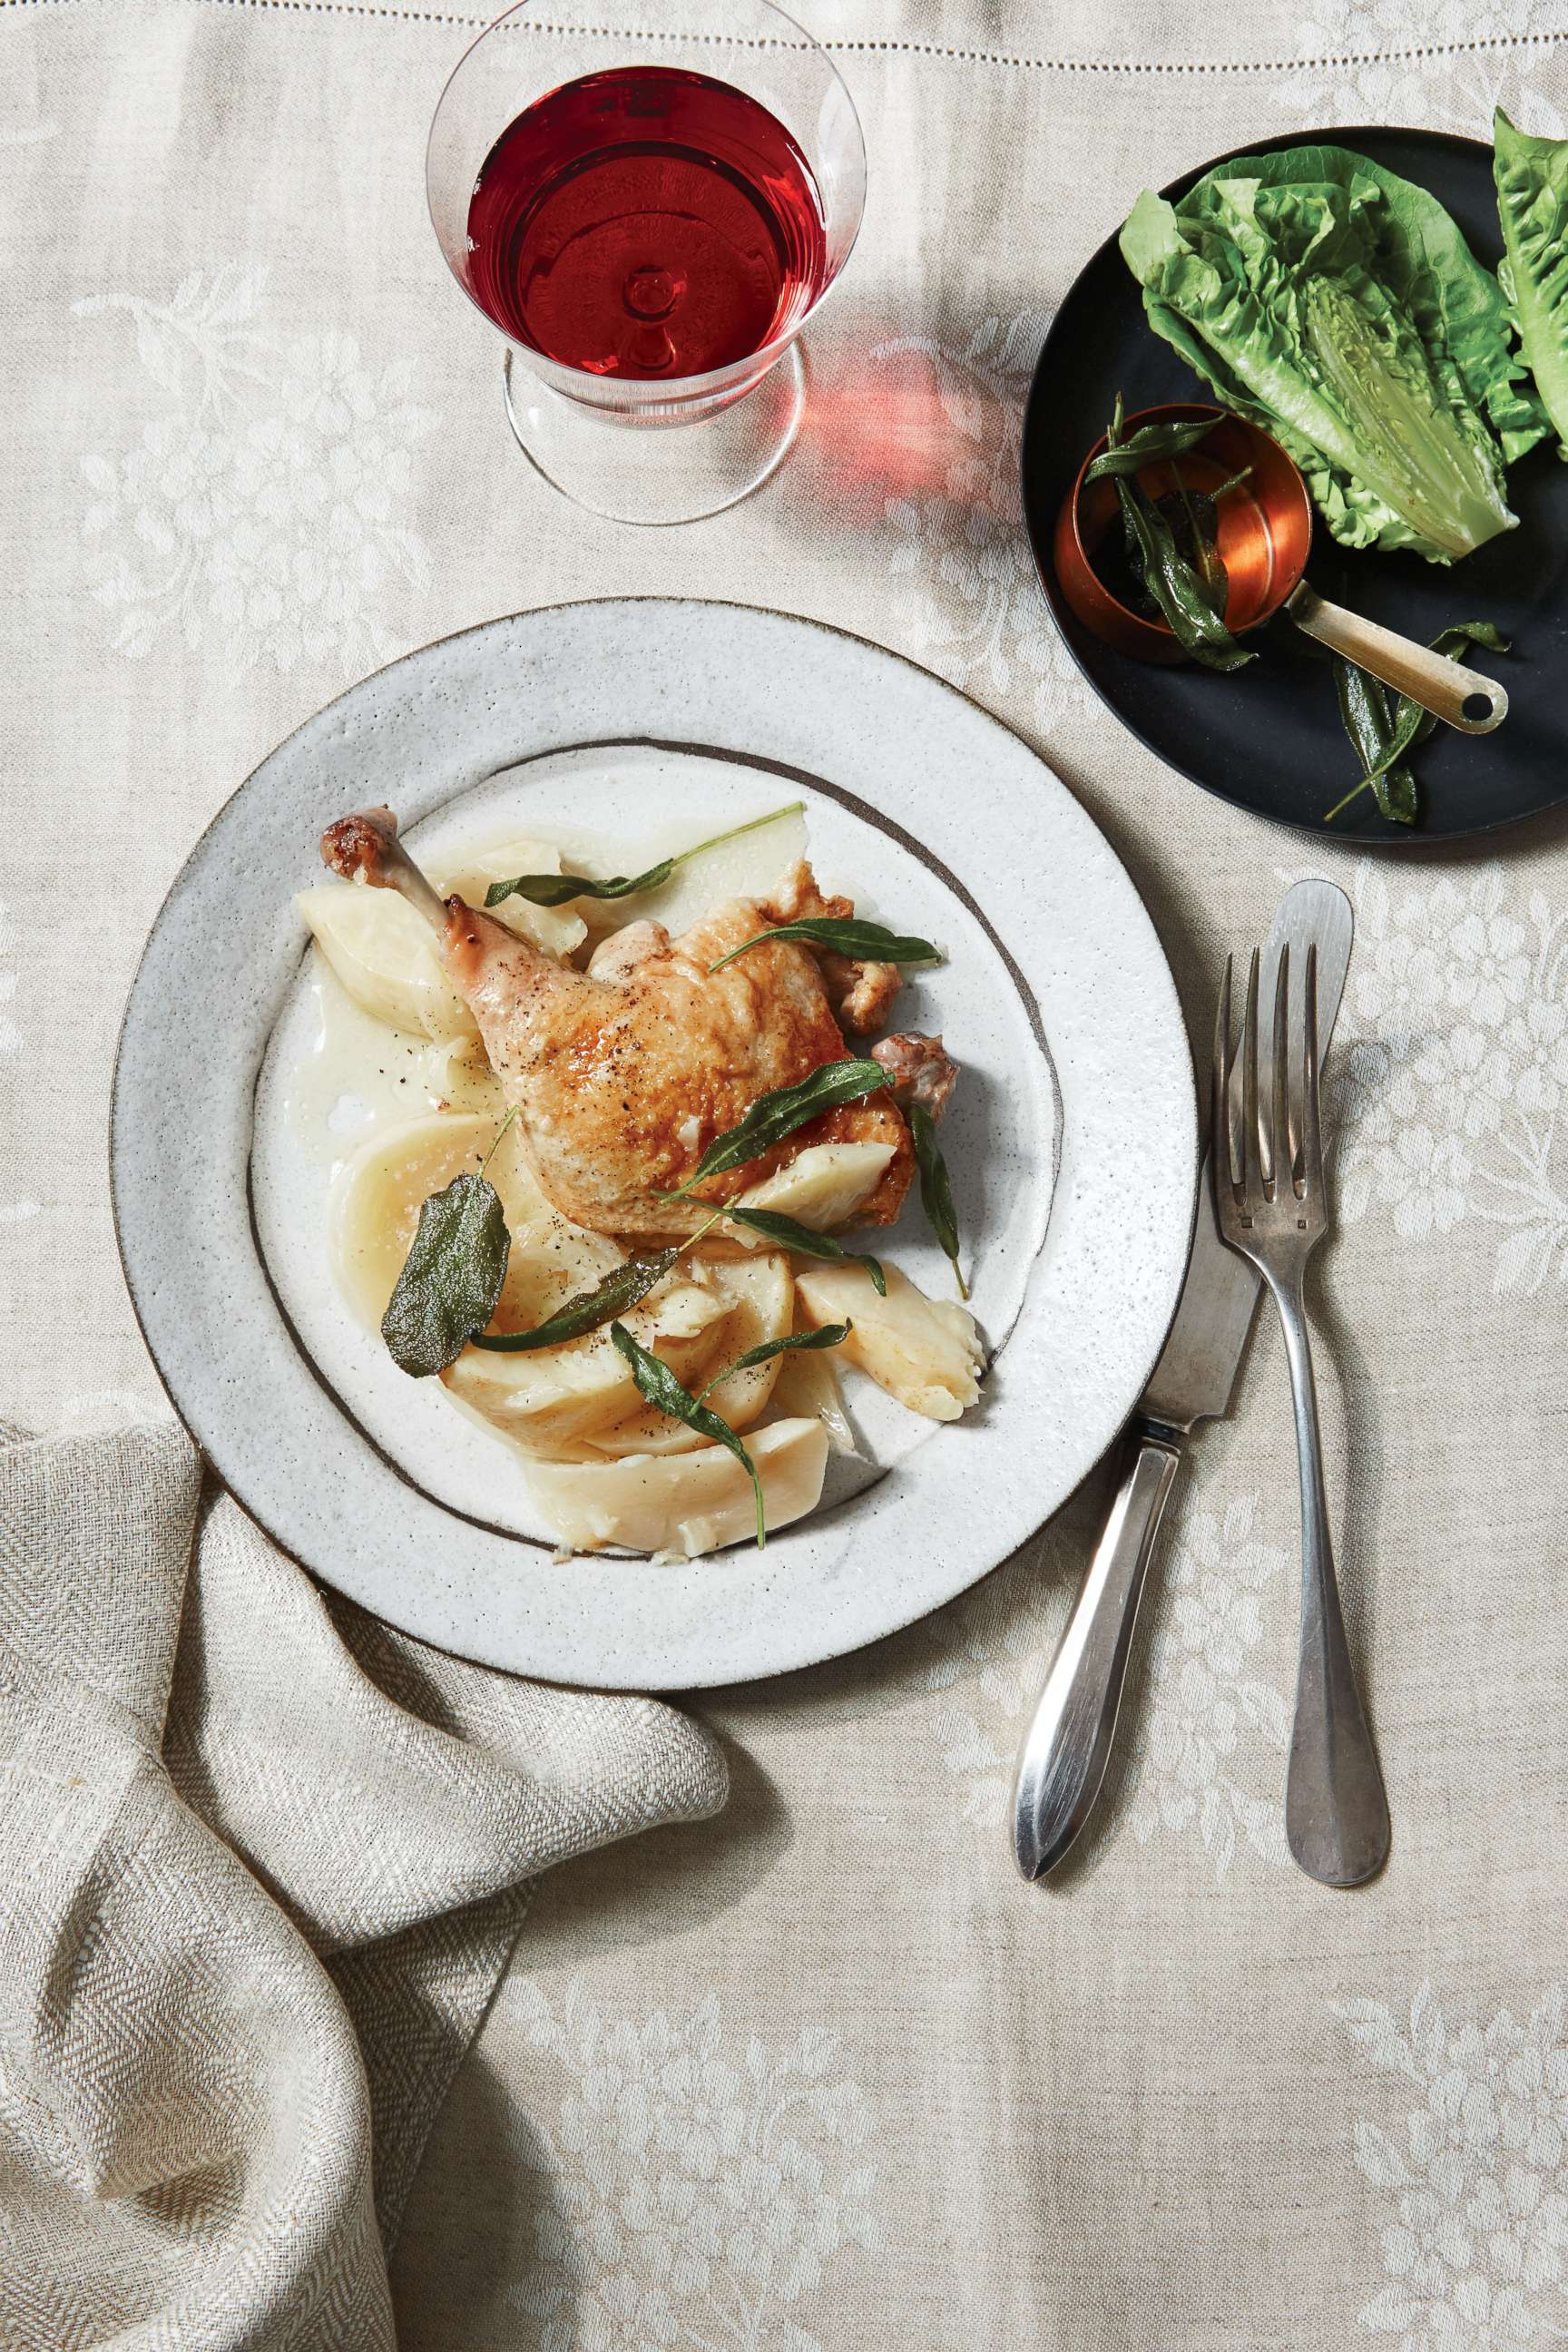 PHOTO: Martha Stewart's braised duck with turnips and celery root.